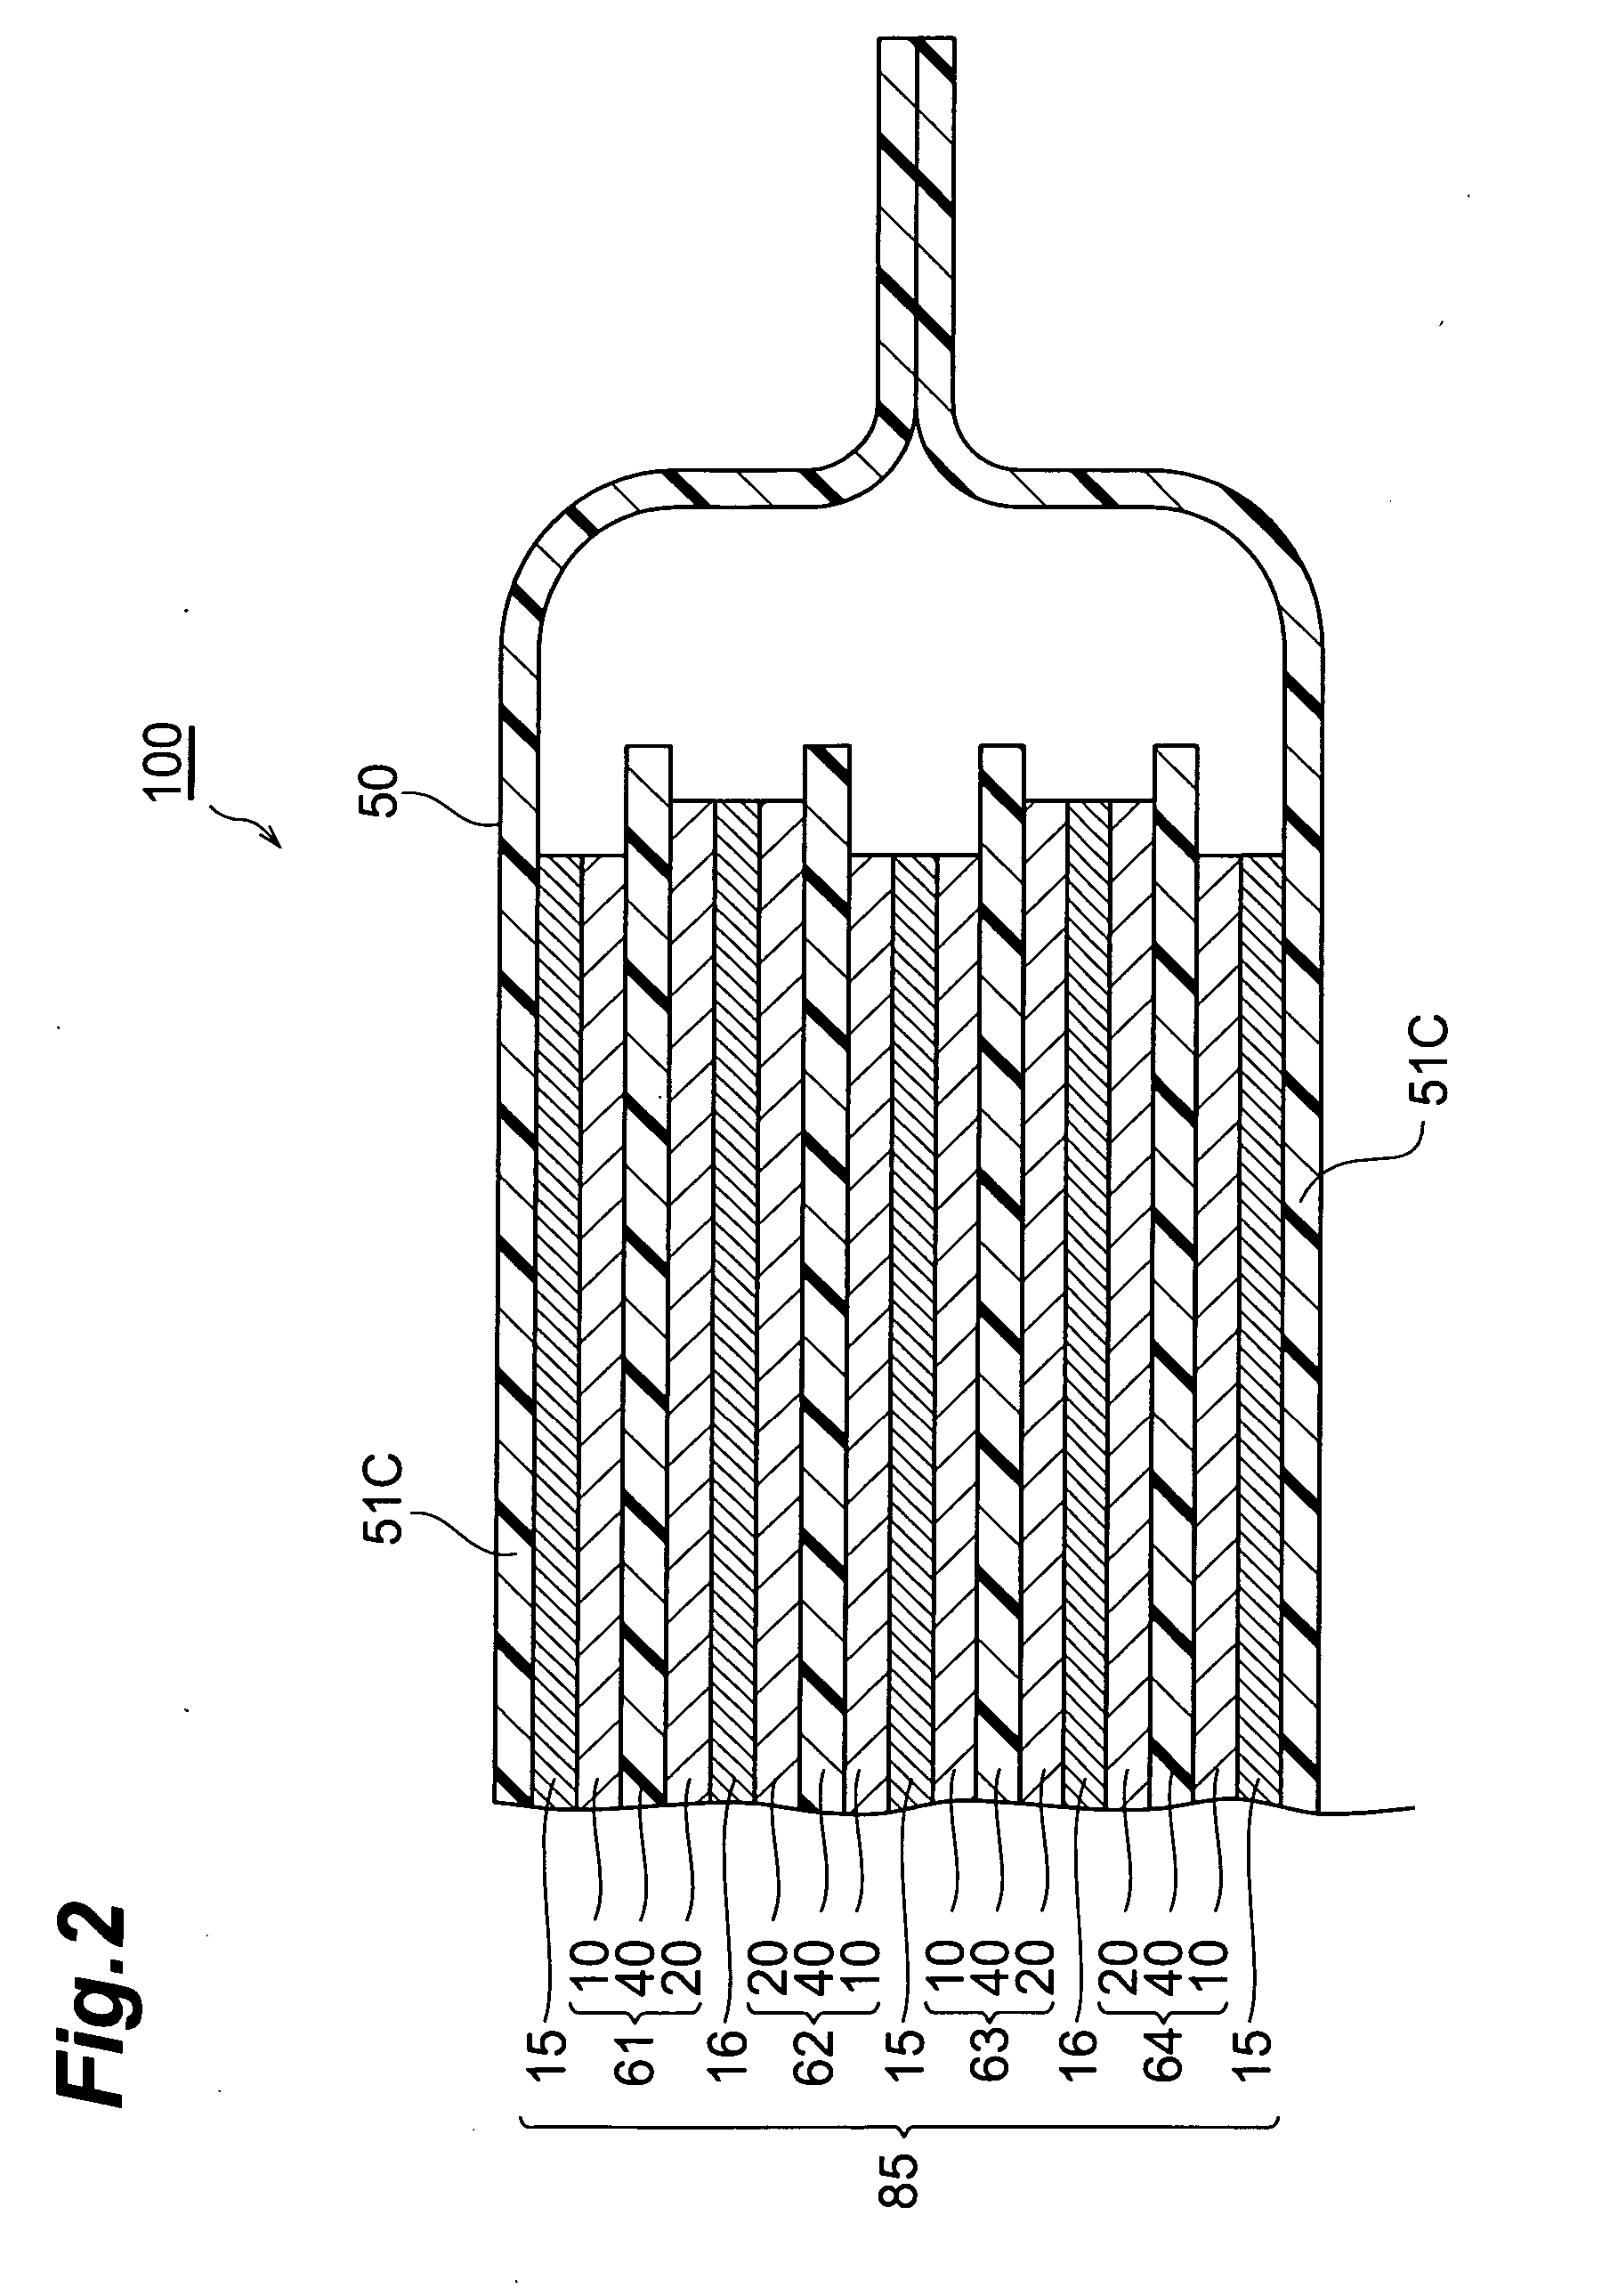 Lithium-ion secondary battery and method of charging lithium-ion secondary battery